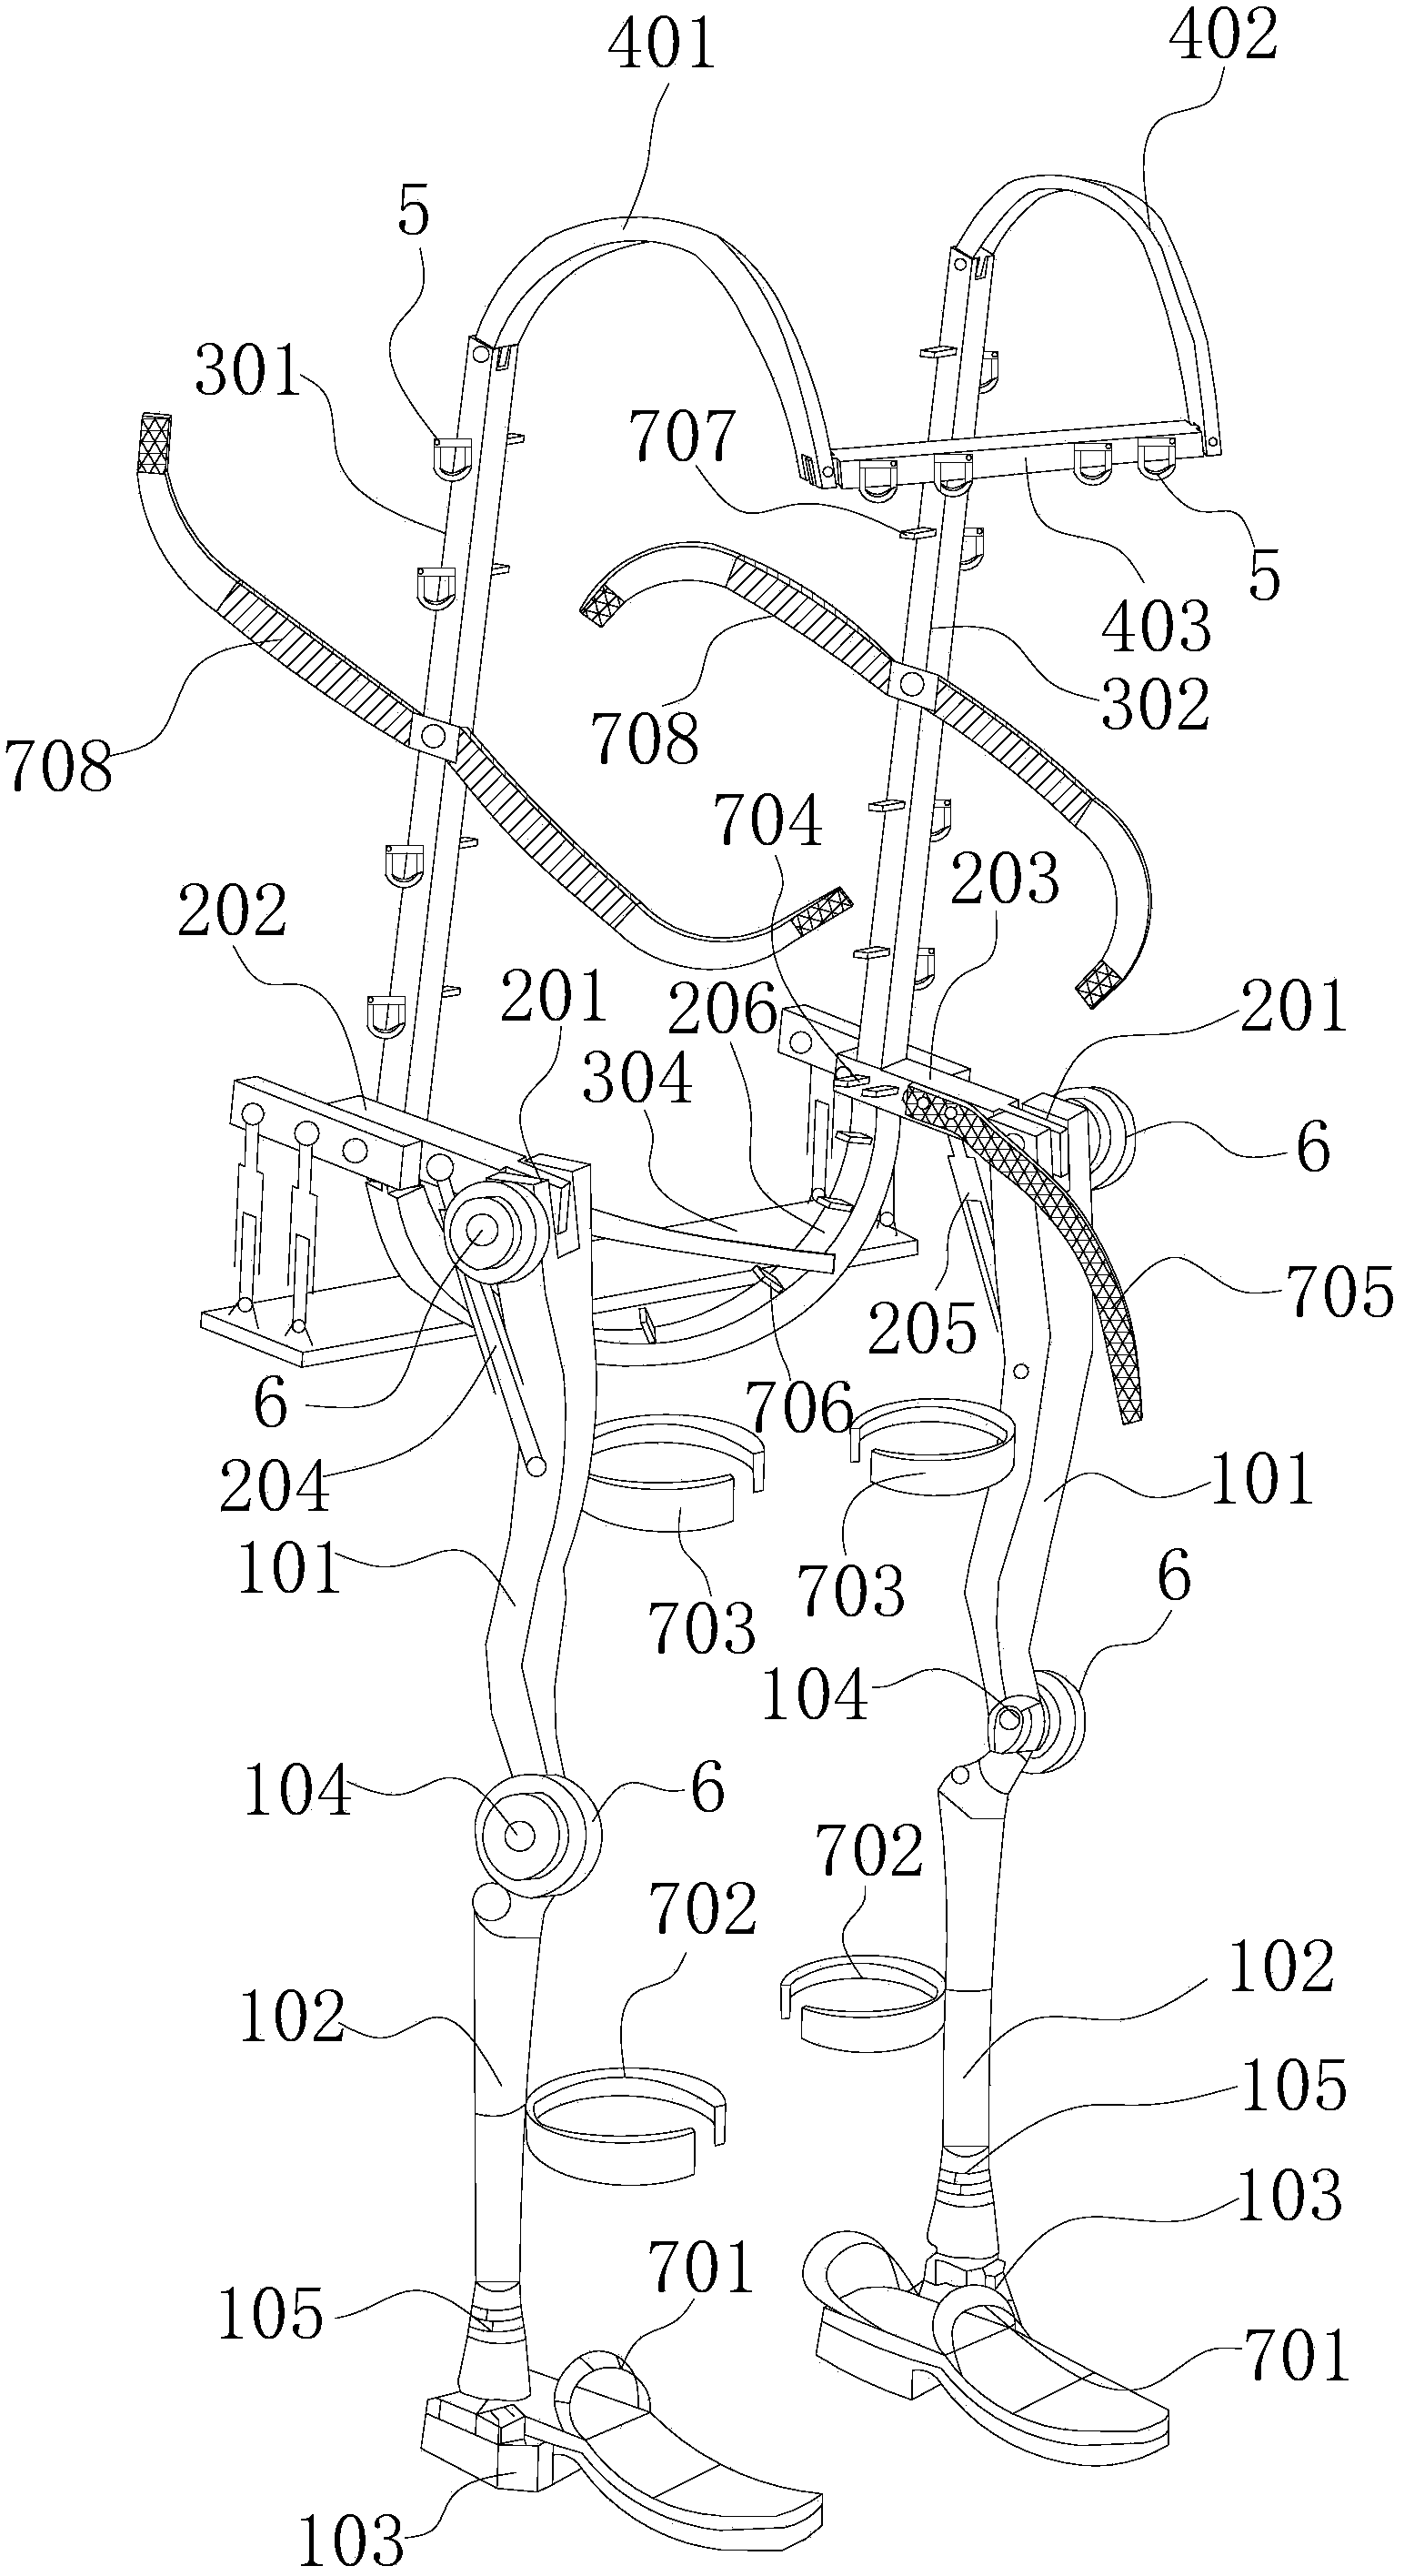 Assisting method and device for movements in space